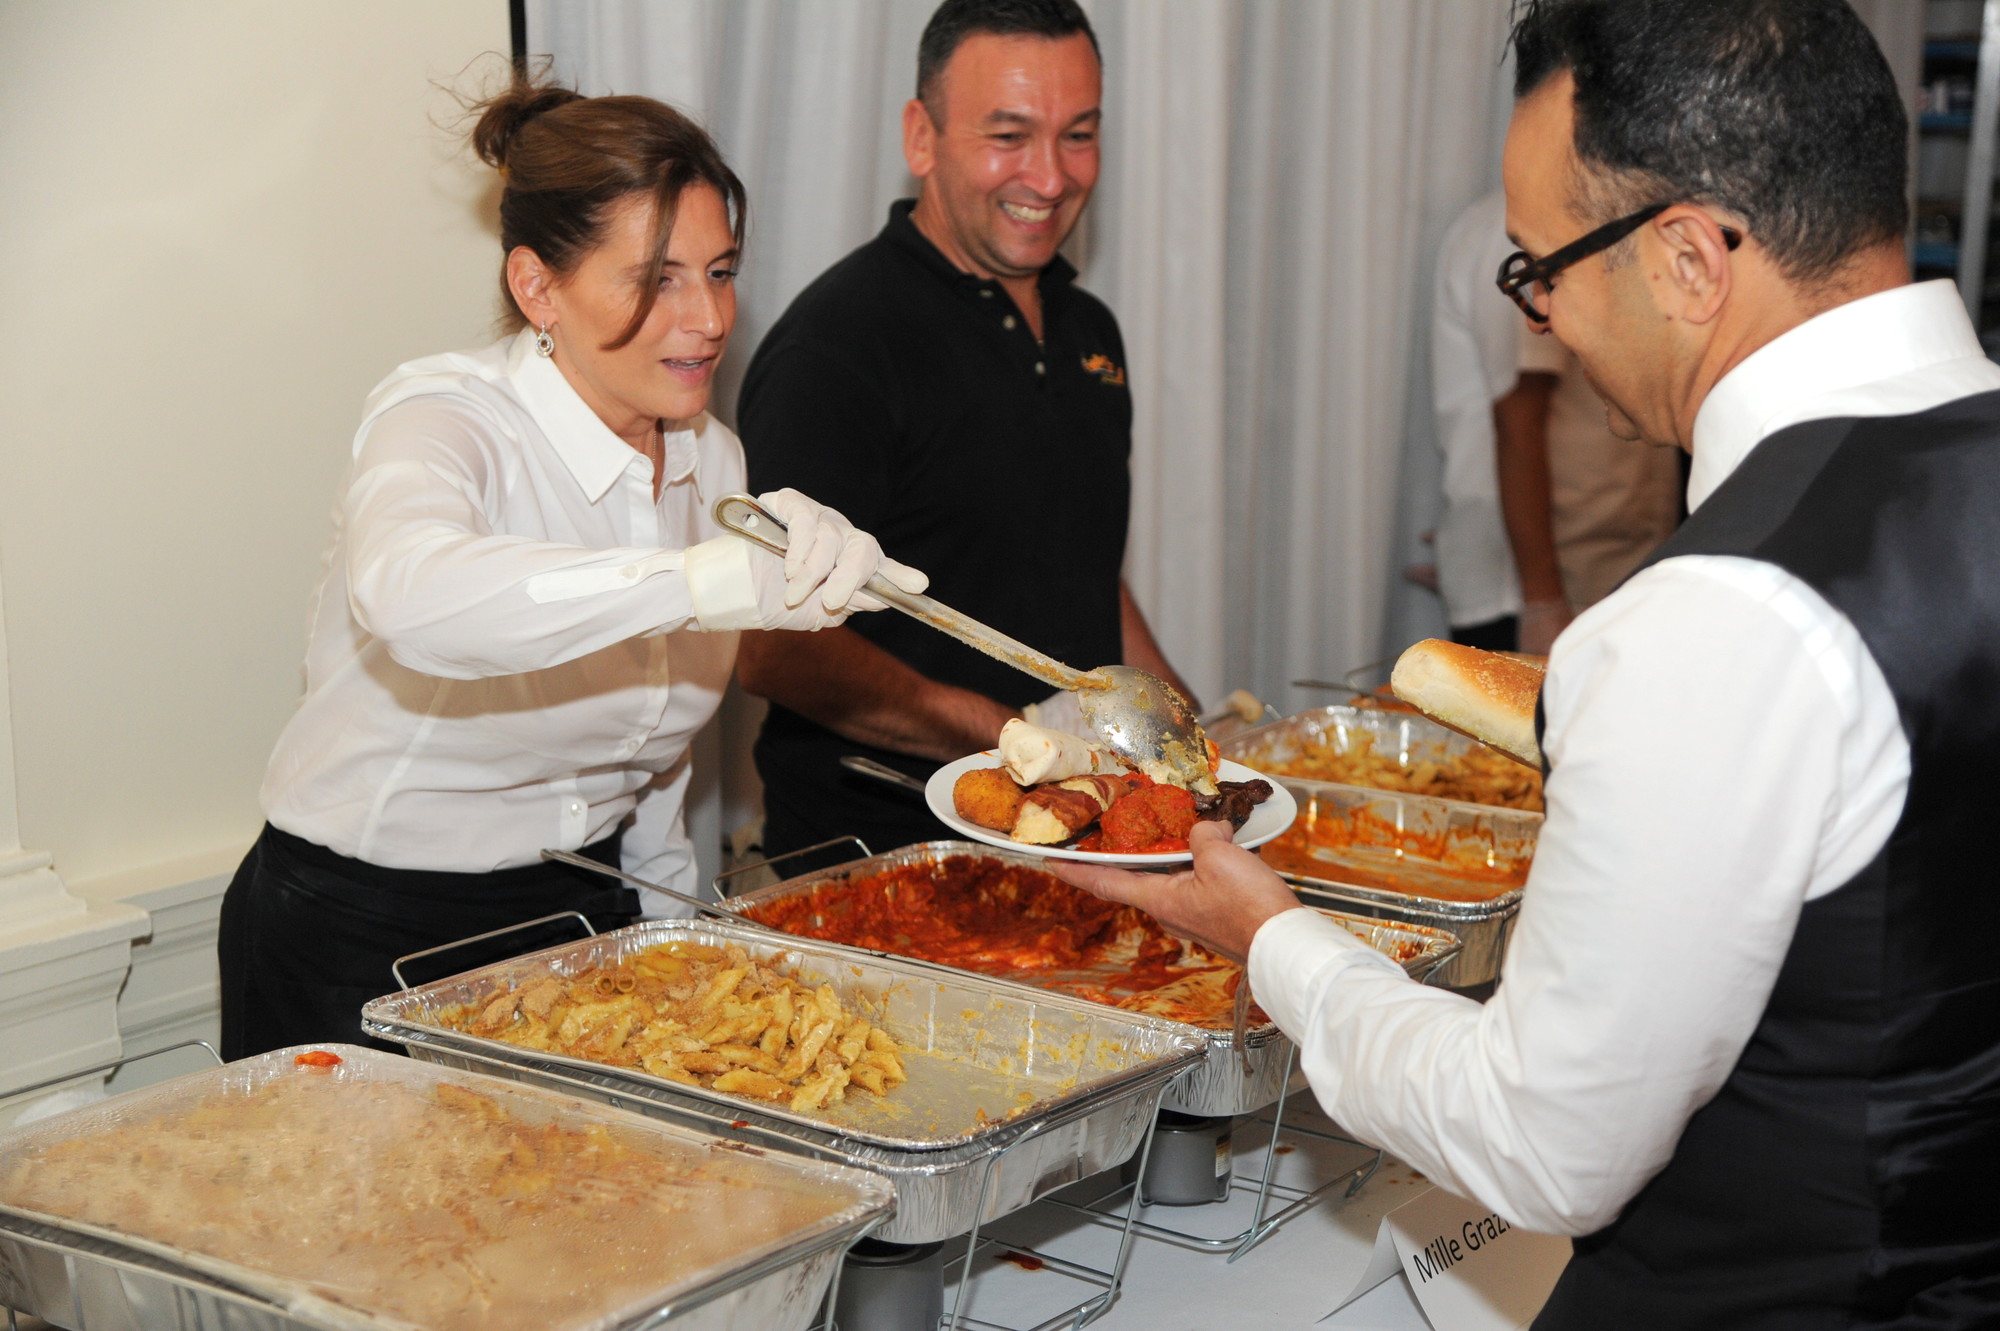 Joann and Jono Aronson, from Millie Grazie, served a variety of Italian foods at last year's Culinary Delights.